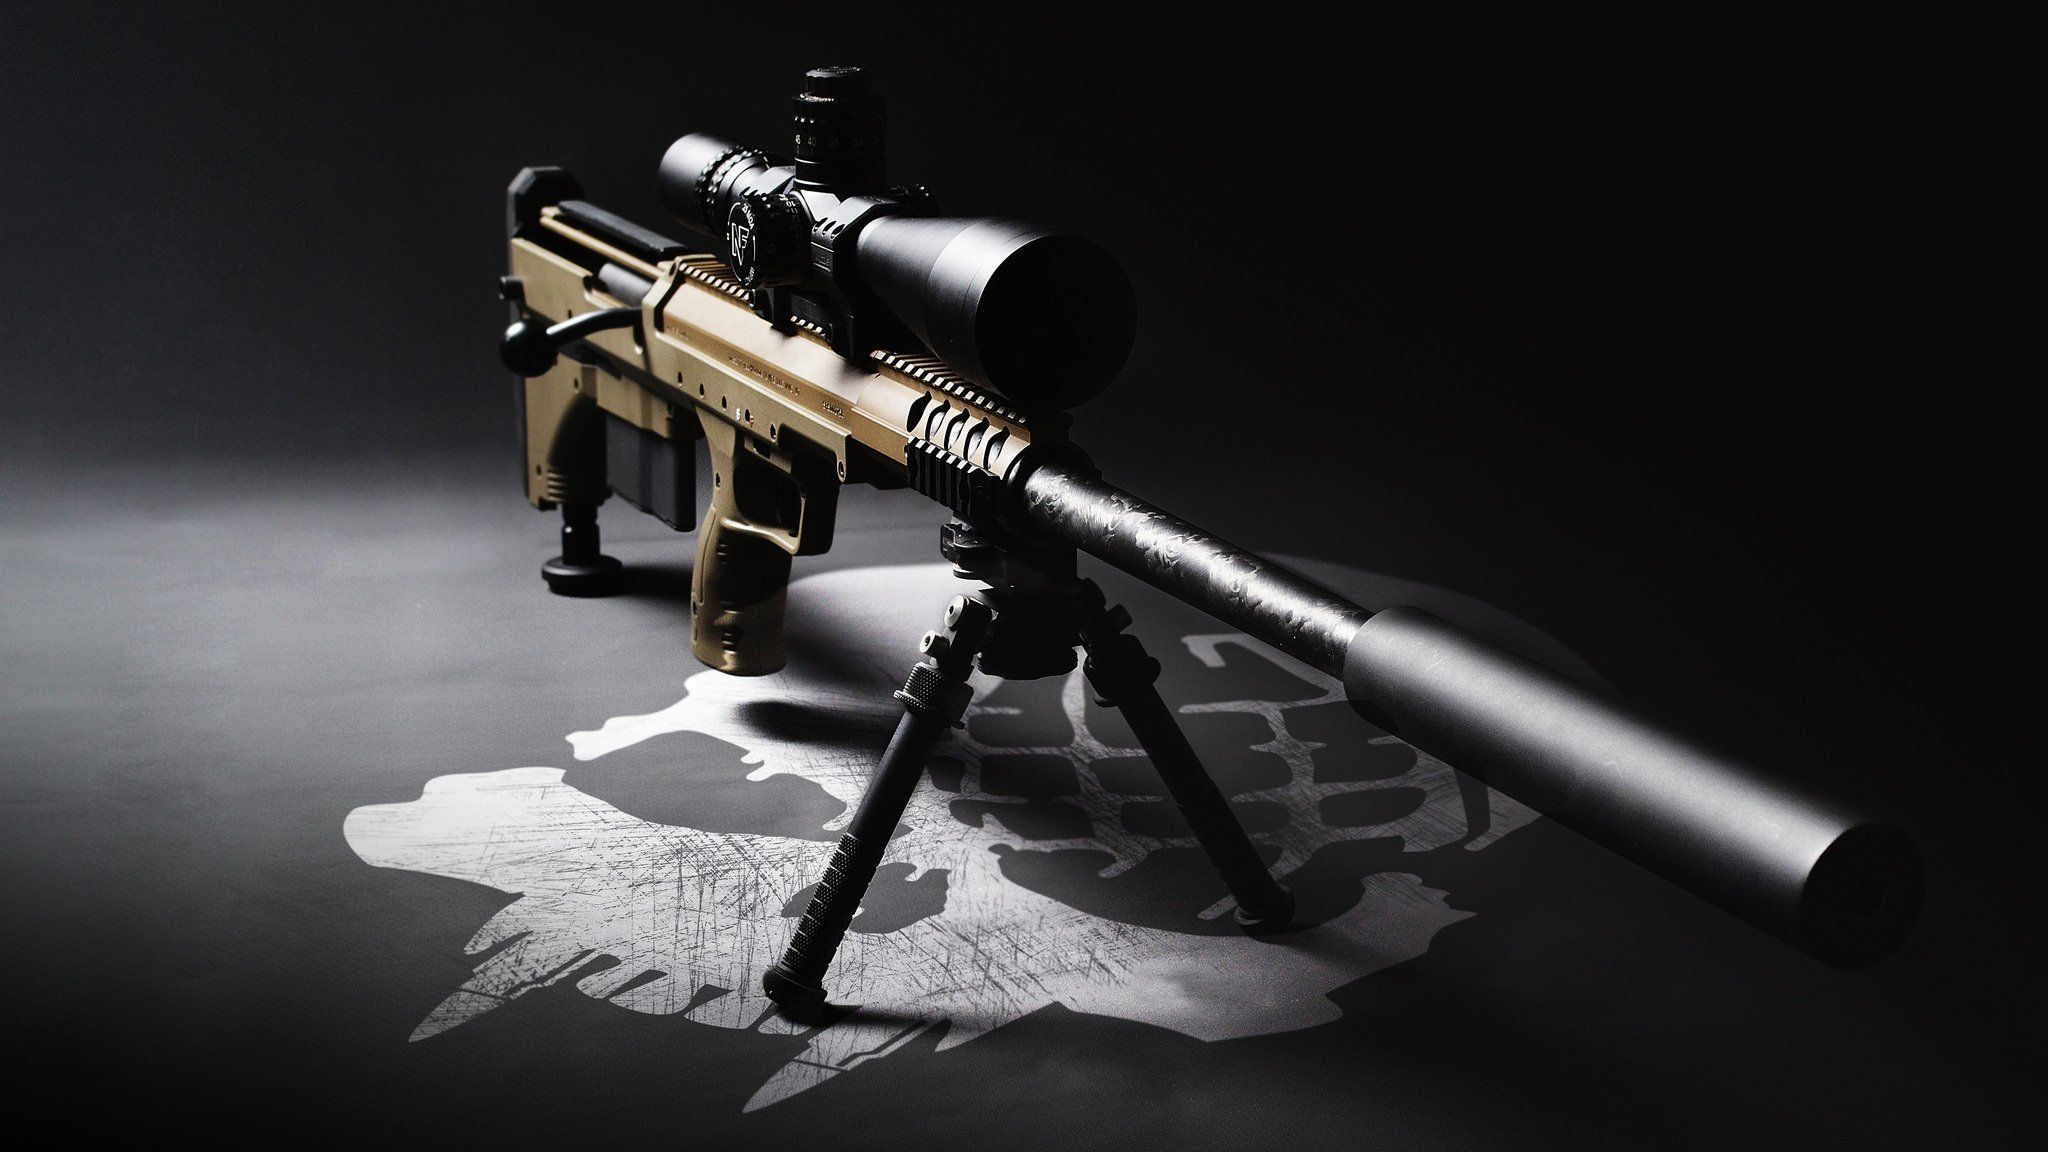 Free download Gallery For gt Sniper Rifle With Silencer Wallpaper